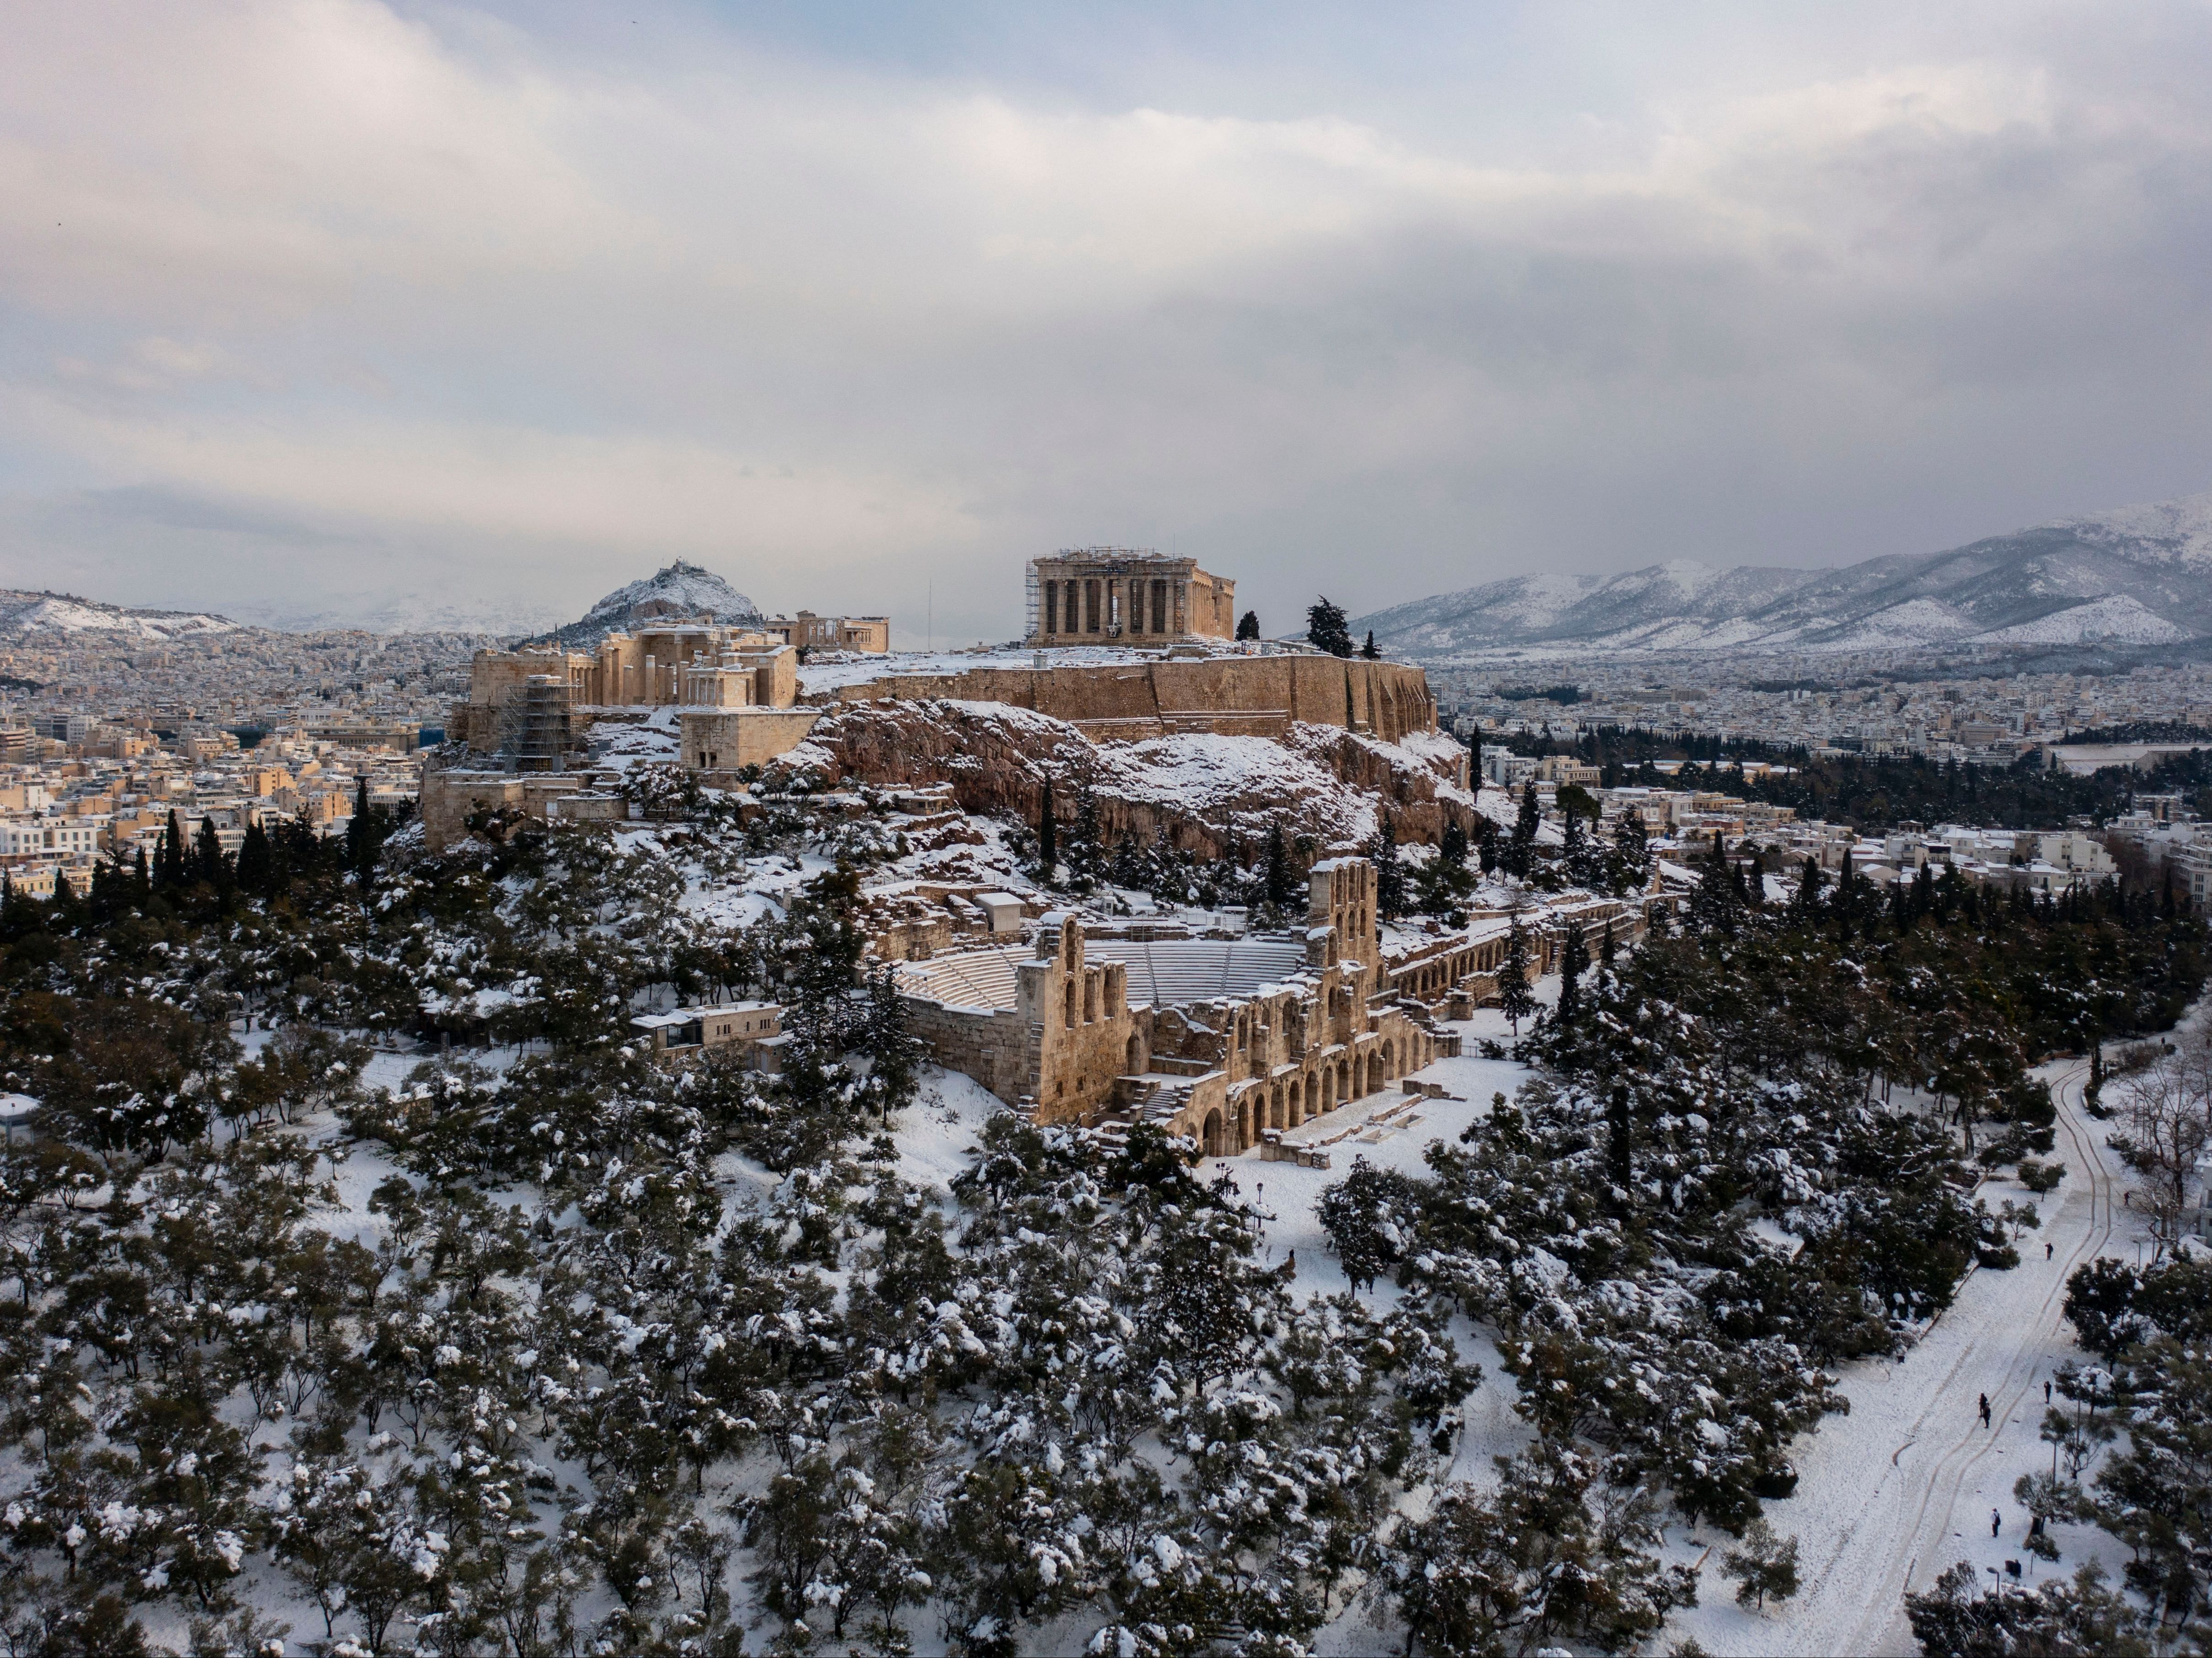 The snow covered Ancient Temple of Parthenon atop the Acropolis hill